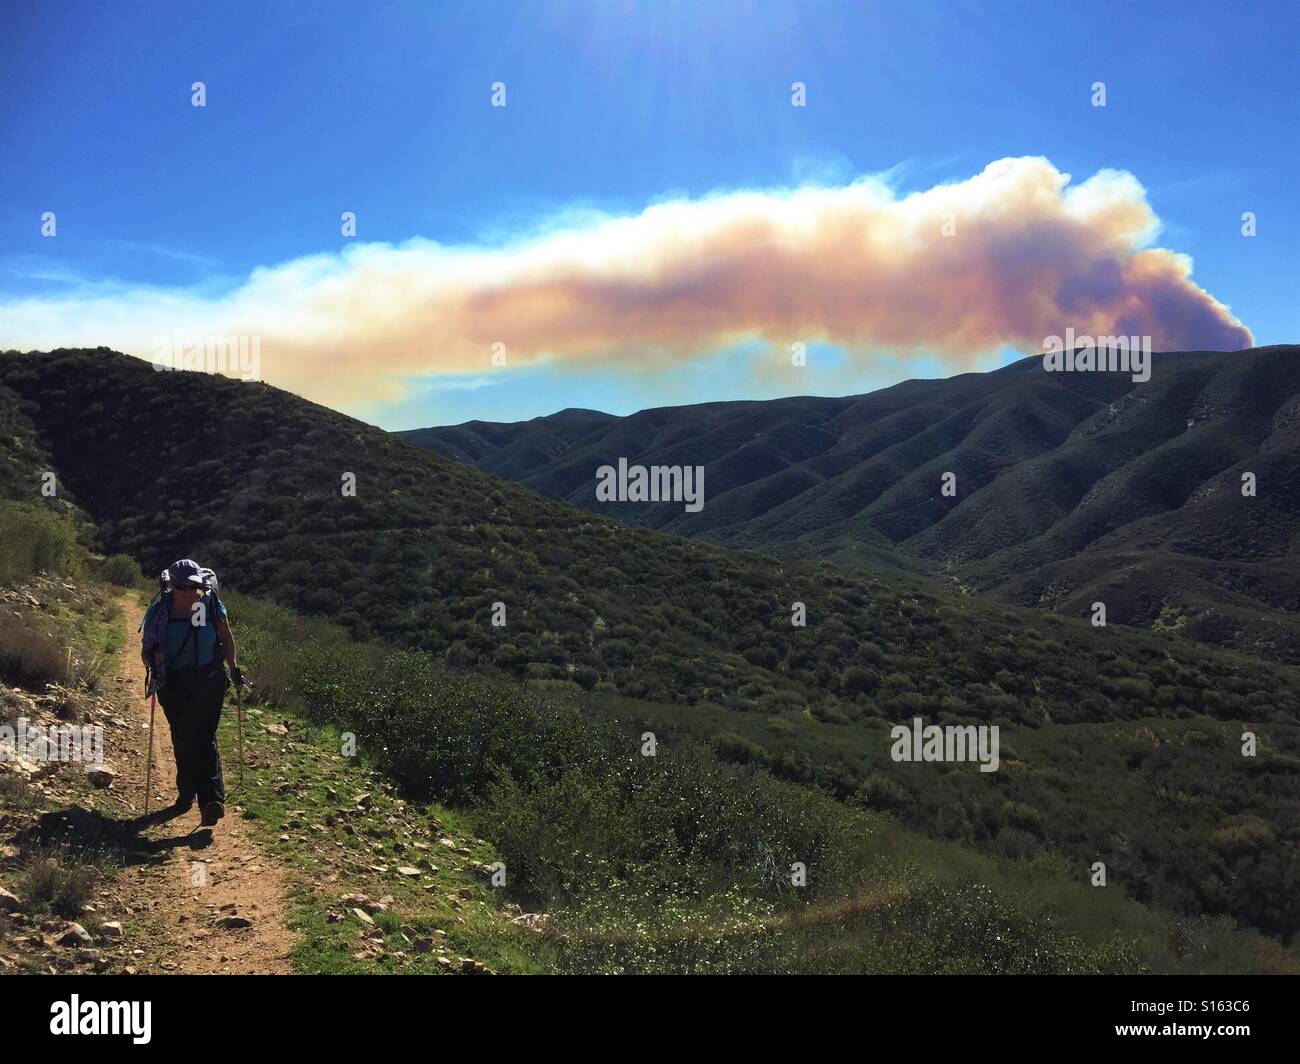 Hiking away from the fire Stock Photo